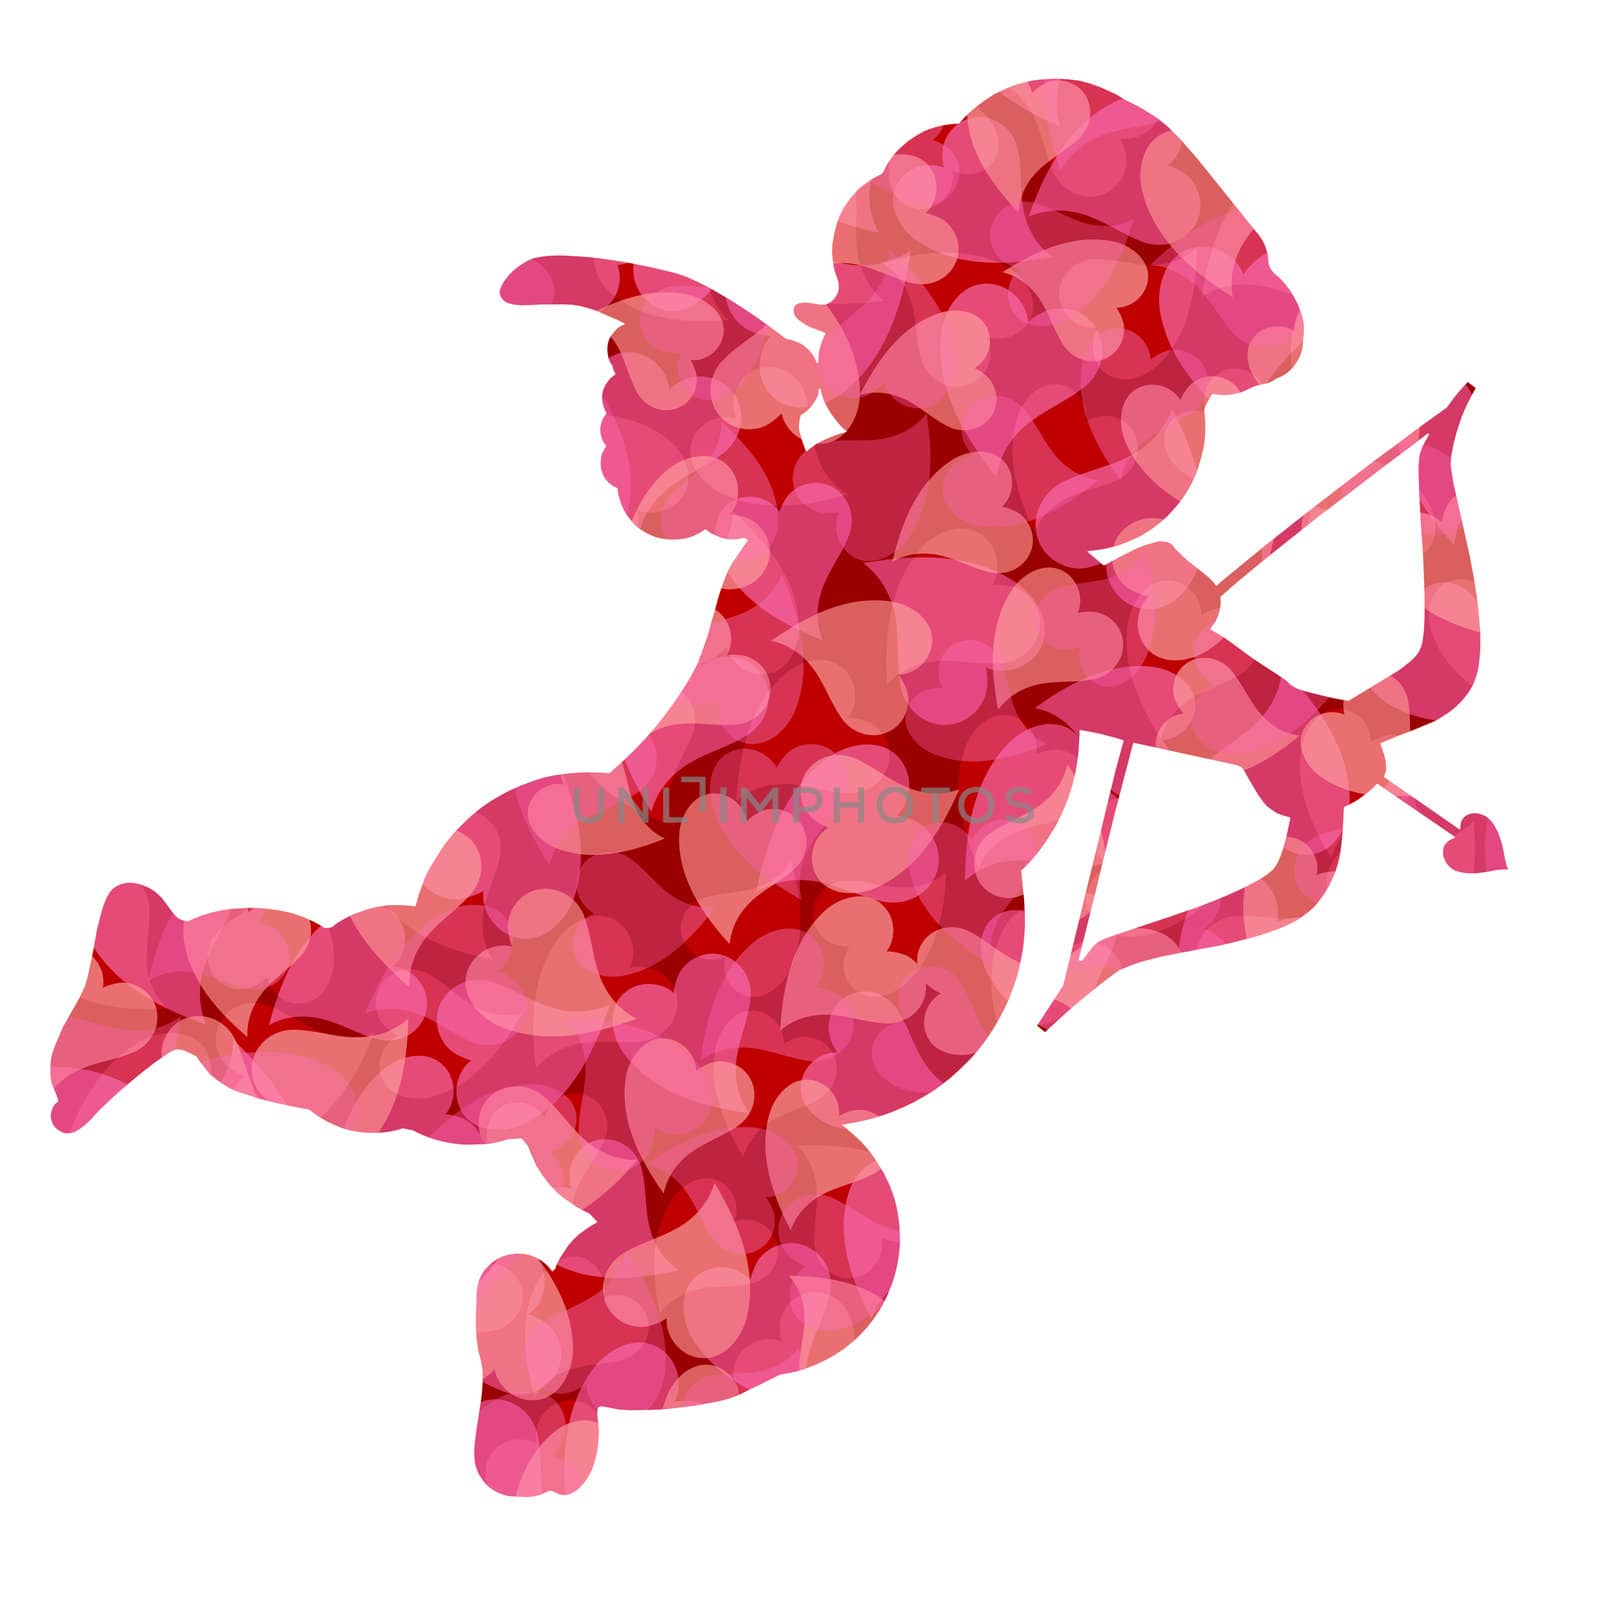 Valentines Day Cupid with Pink Pattern Hearts Illustration by jpldesigns